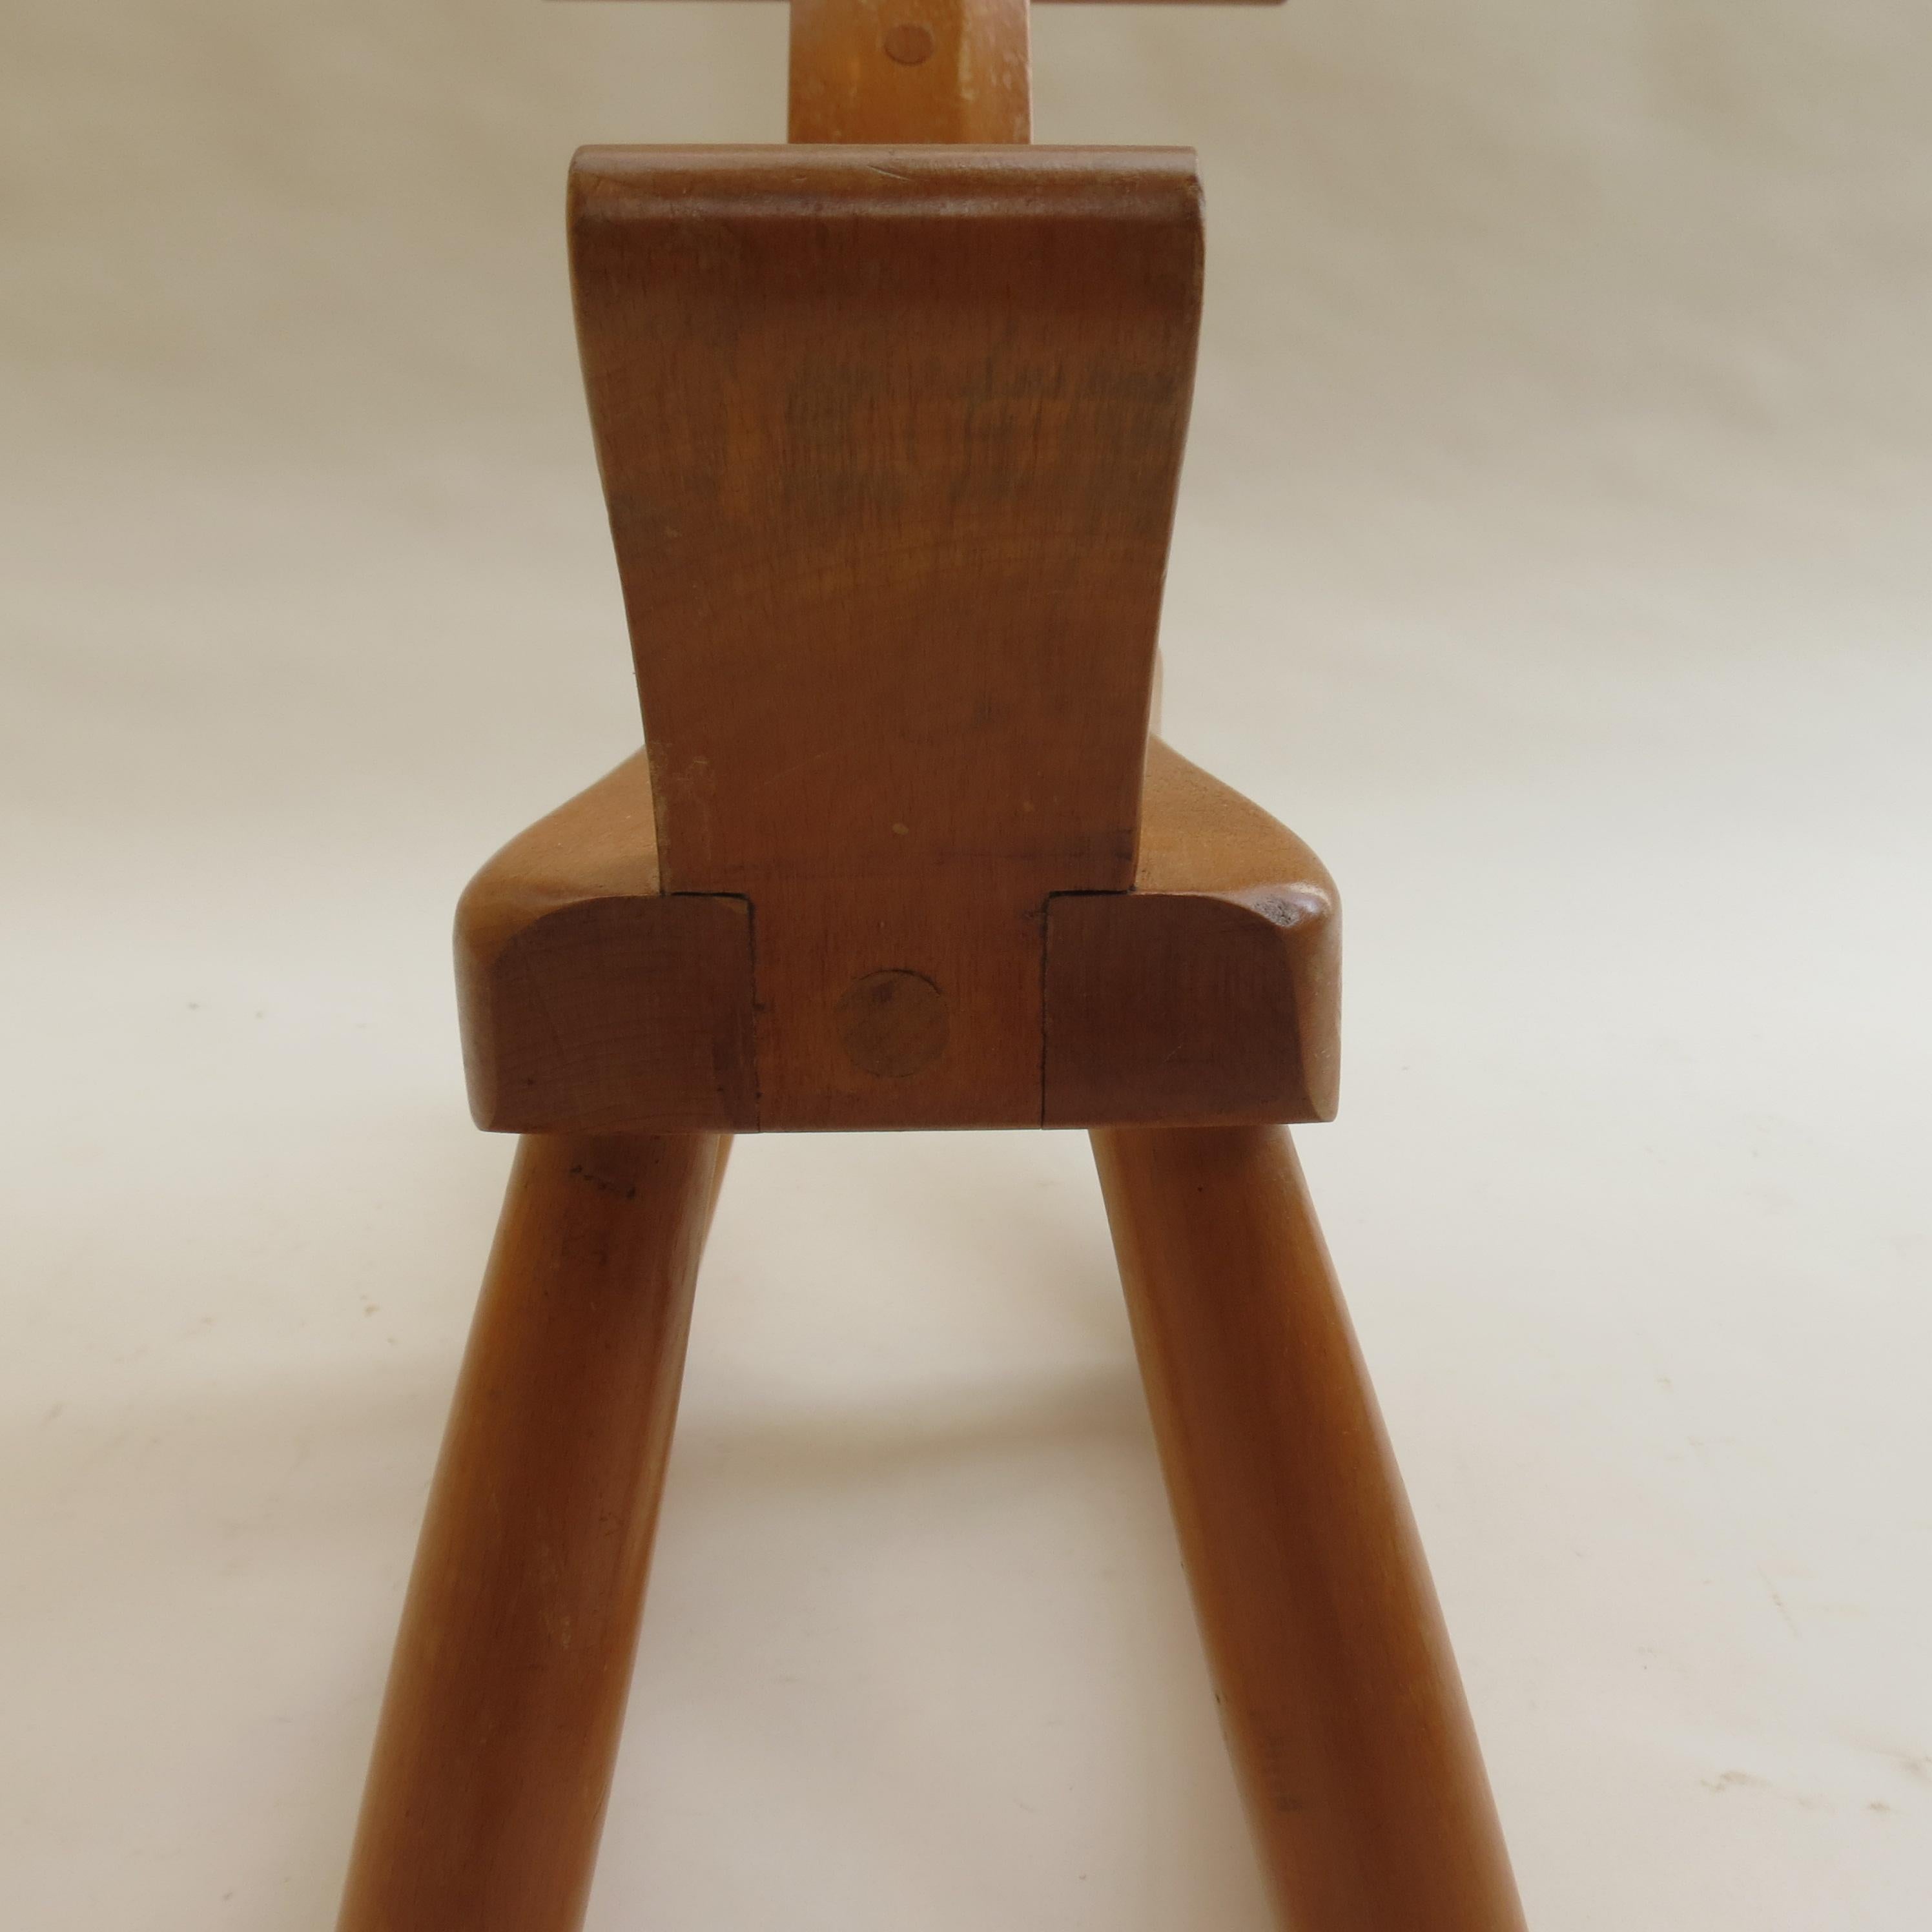 Original vintage Kay Bojesen rocking horse. 1960s edition, made from solid Beech with a lacquered finish. Stamped to underside Kay Bojesen, Denmark.
Original design 1936

Measures: 73cm x 22cm wide by 44cm tall 
Seat height 26cm.
 